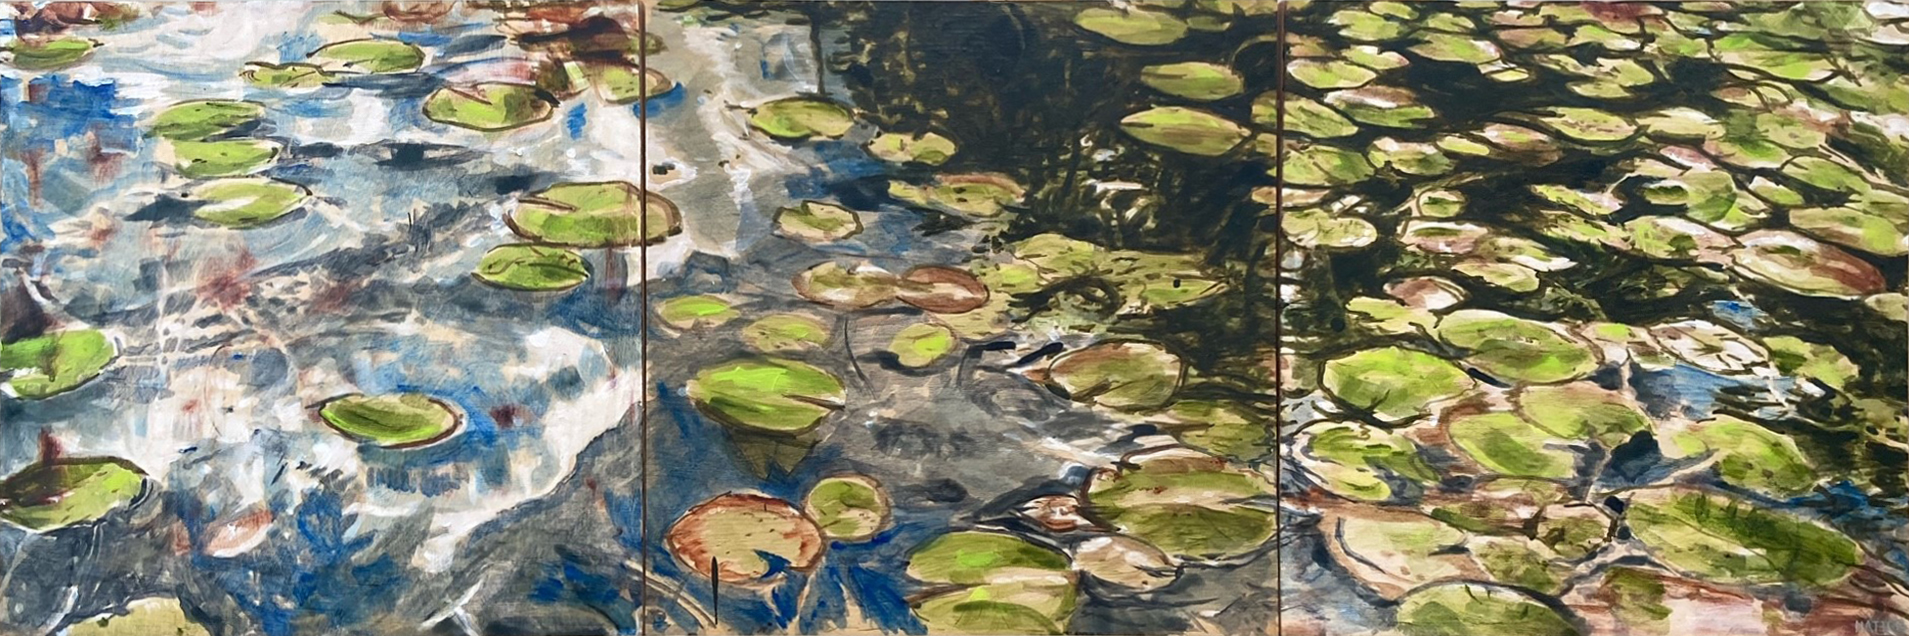 water, water reflections, resin, Quebec artist, reflections, lily pads, ripples, LGBTQ2+